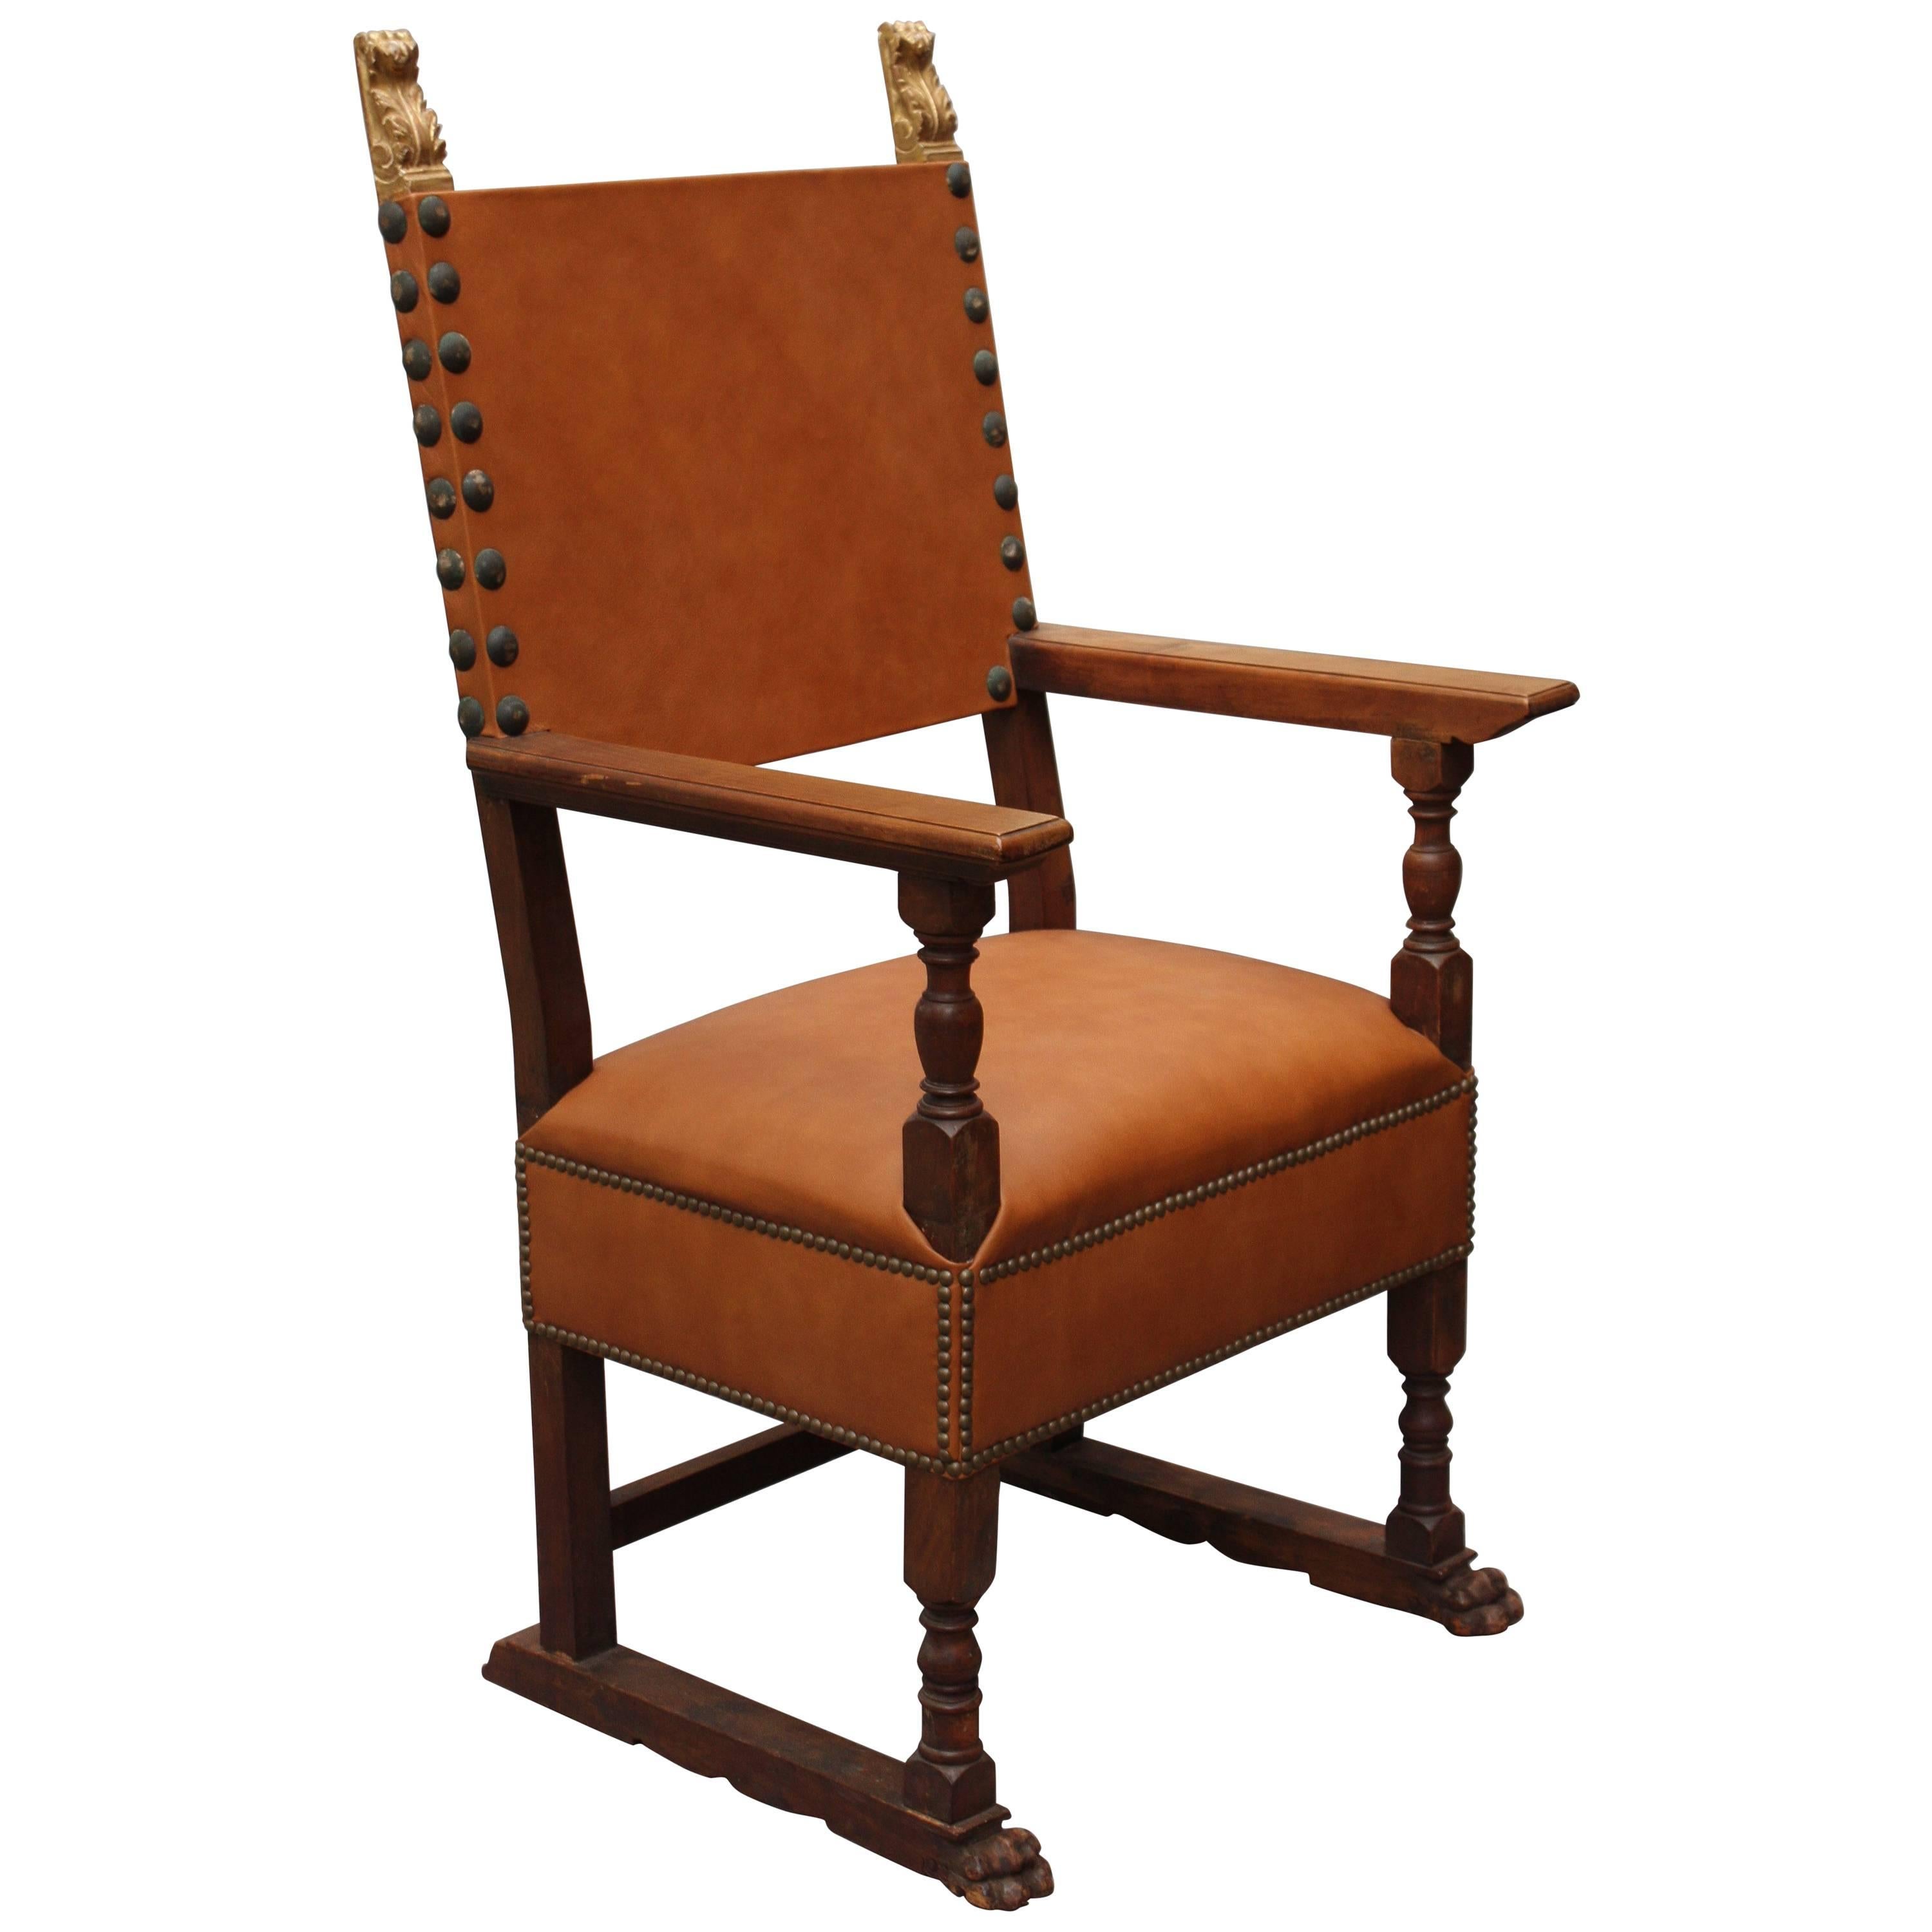 1920s Spanish Revival Armchair with Leather Upholstery For Sale